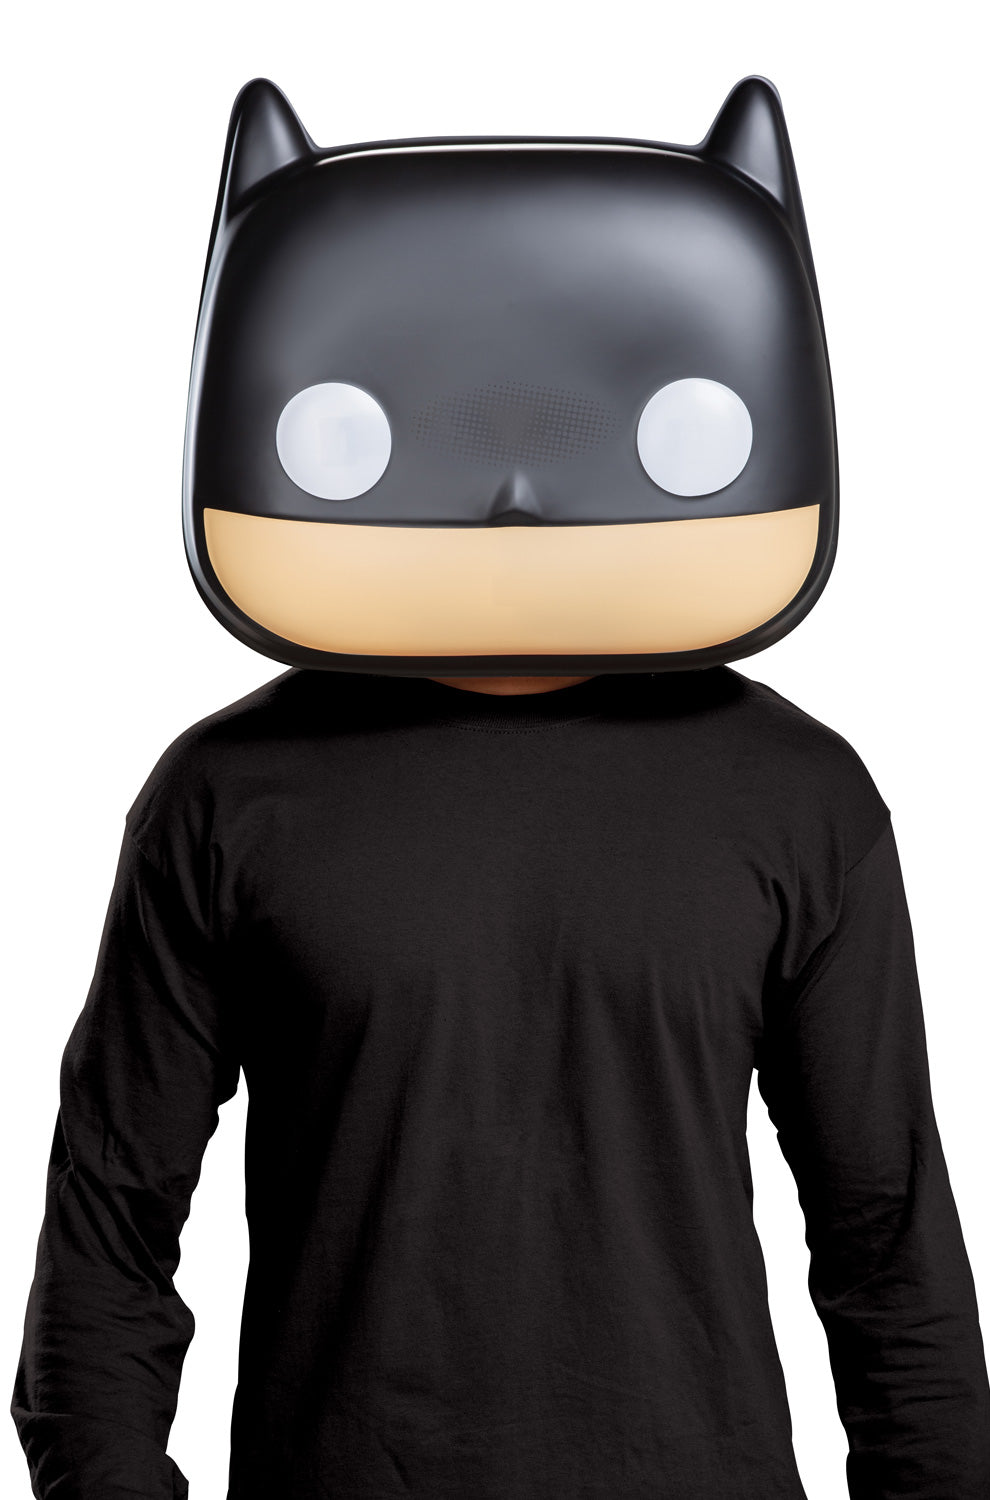 Funko Classic Batman Half Mask (for Costumes, Halloween, Cosplay and More) Product Image